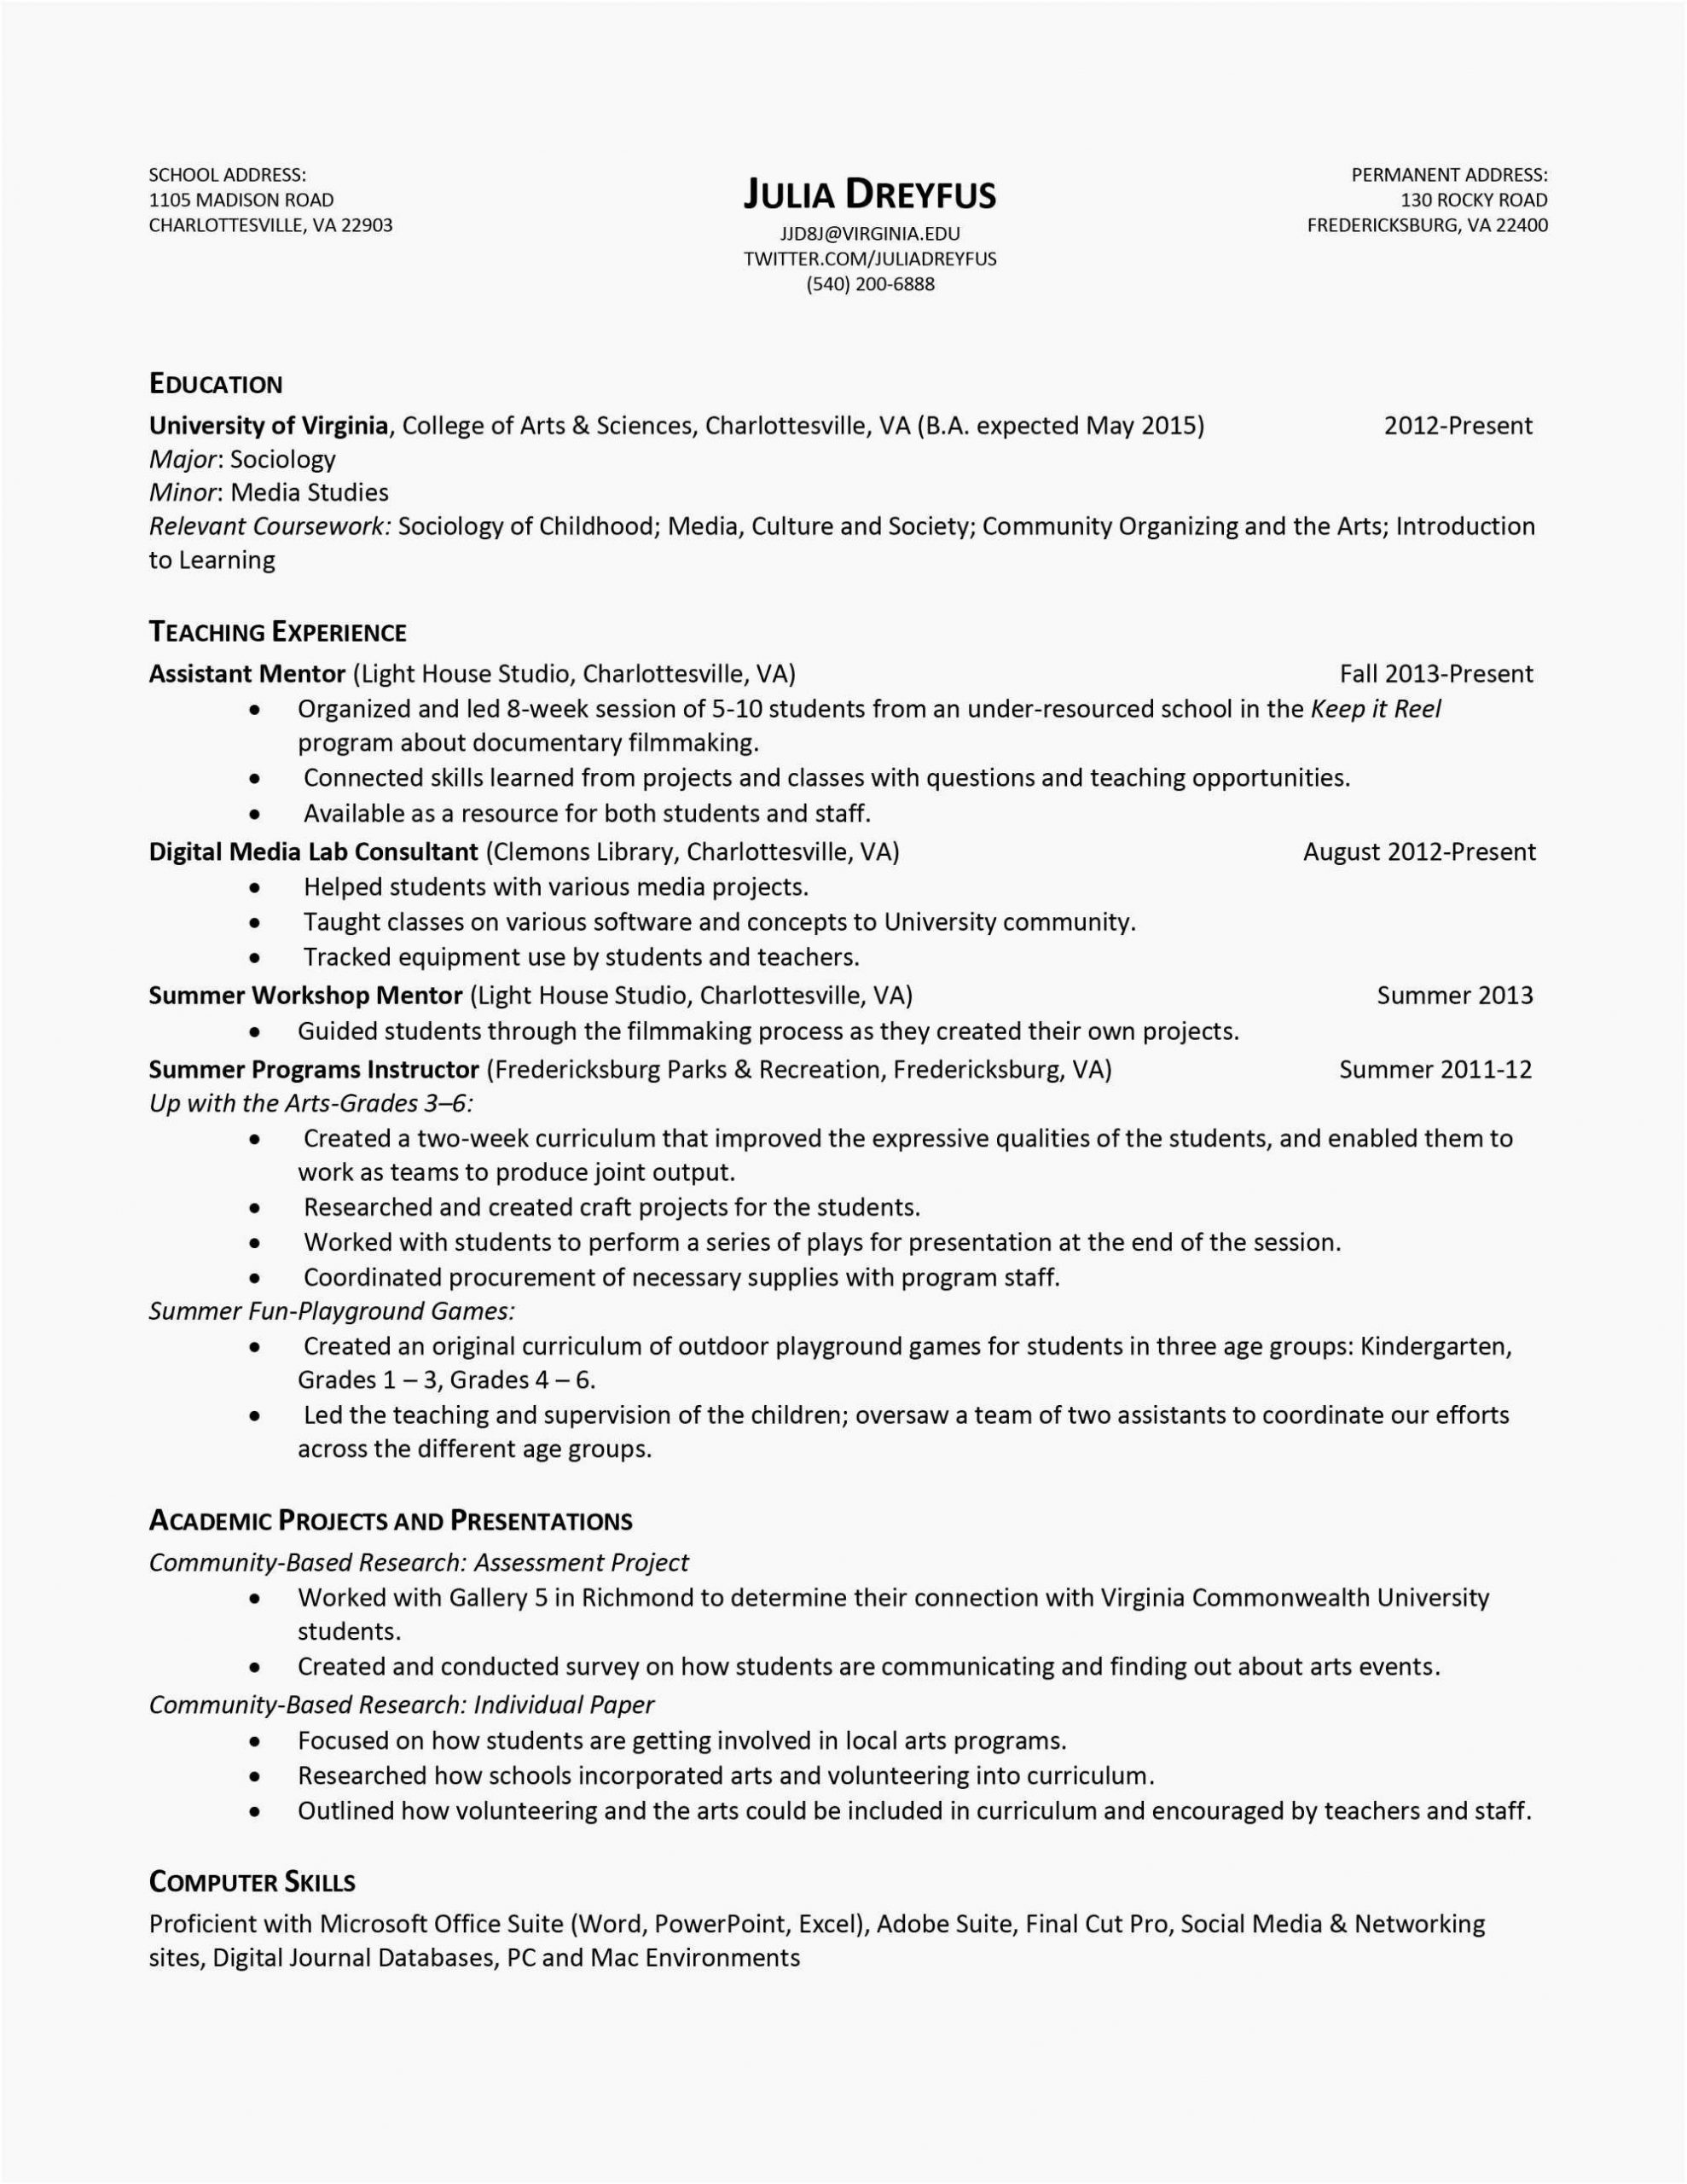 Sample Resume for Ms In Cs Resume Samples for Computer Science Graduates – Good Resume Examples